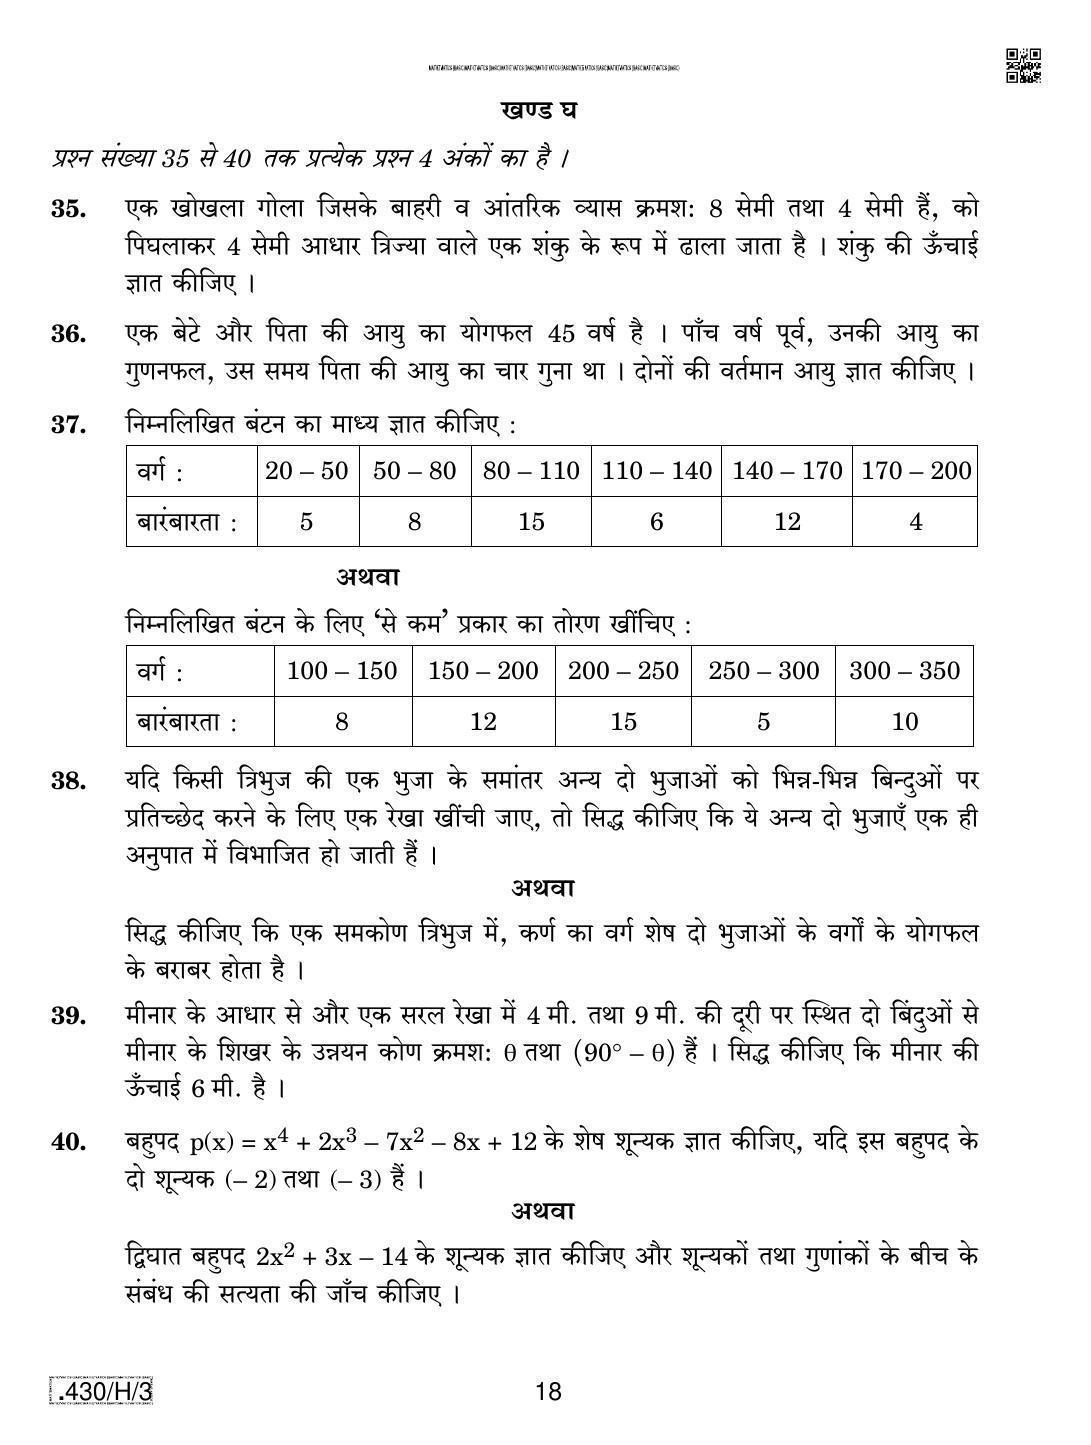 CBSE Class 10 430-C-3 - Maths (Basic) 2020 Compartment Question Paper - Page 18